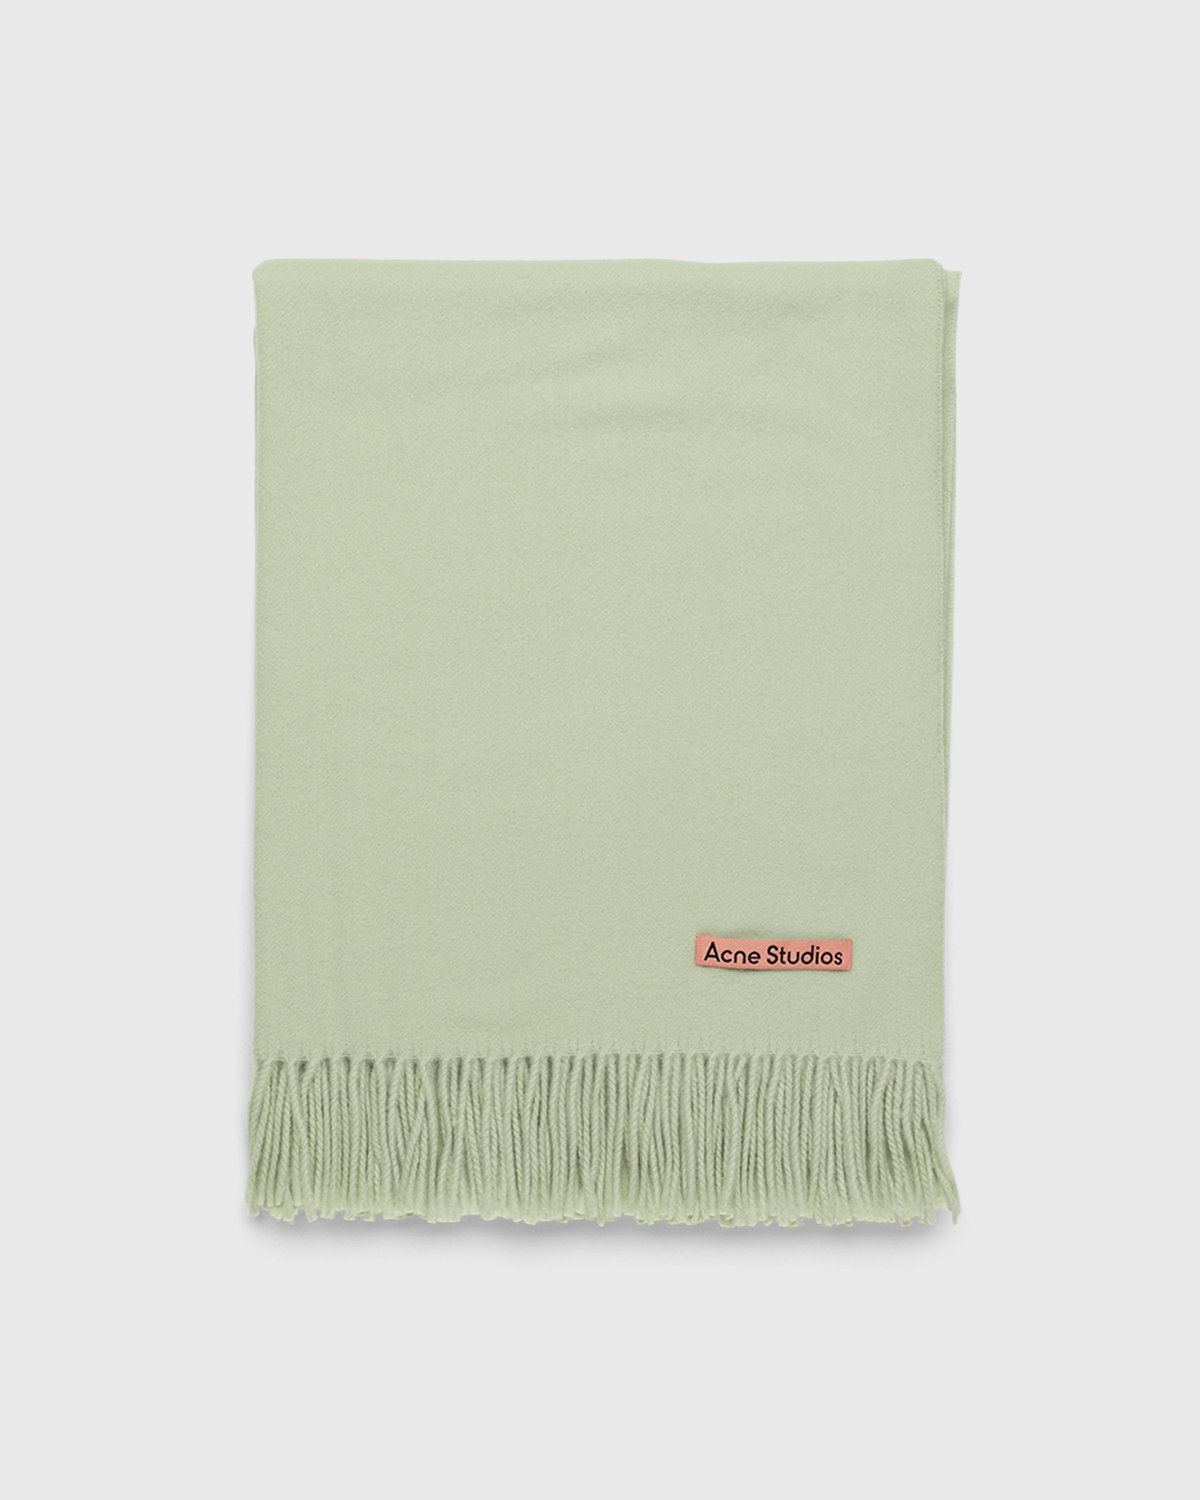 Acne Studios – Canada New Scarf Pale Green - Scarves - Green - Image 2